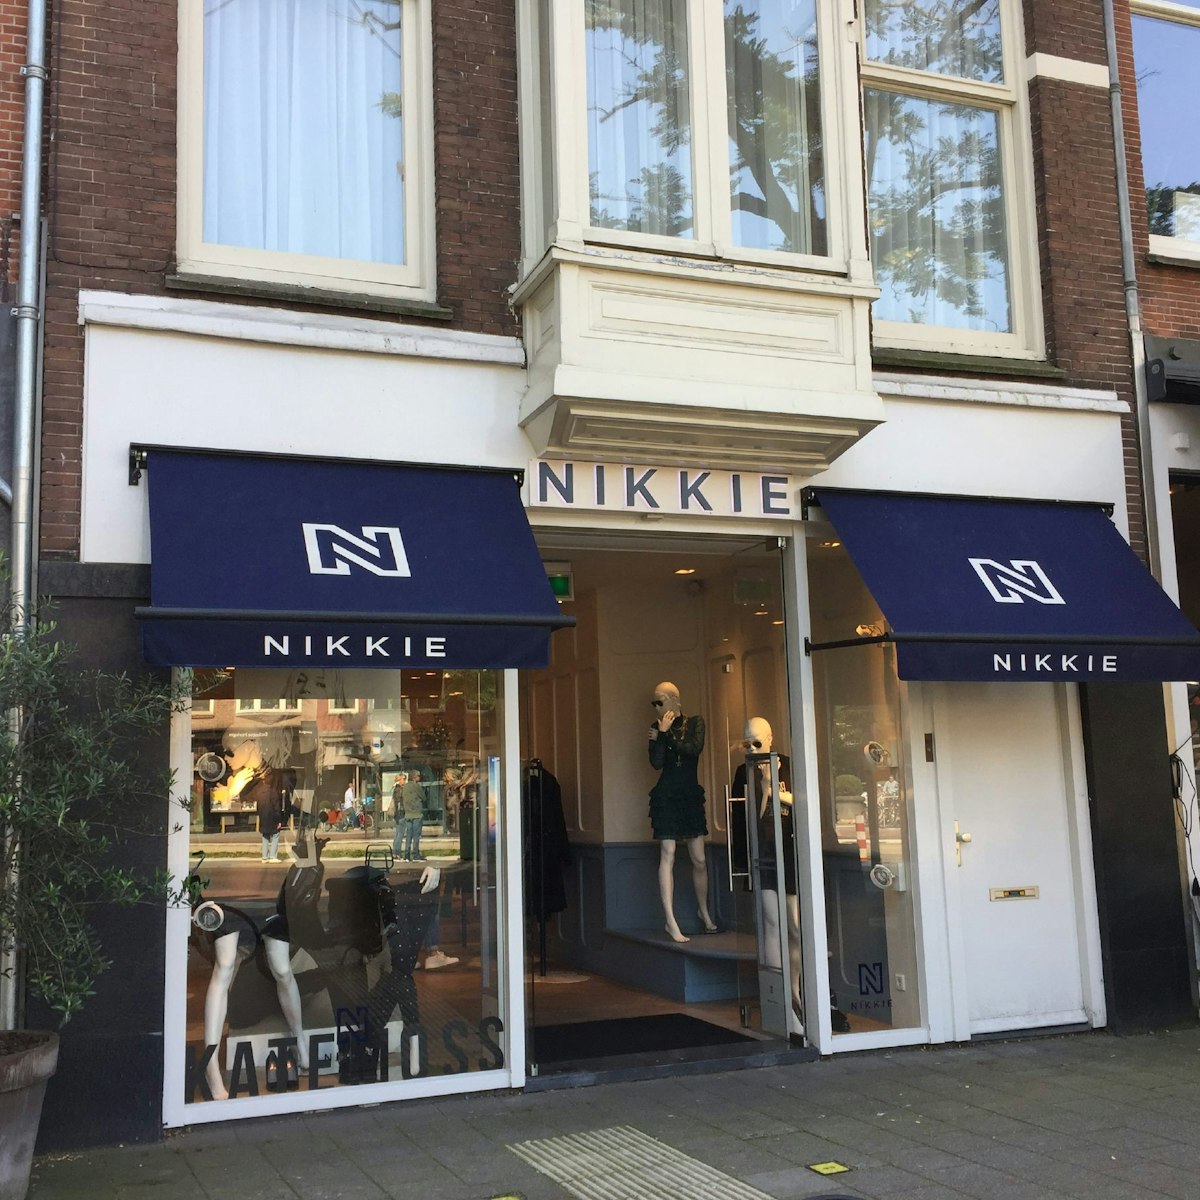 A former Dutch TV star is the face behind Nikkie, Amsterdam